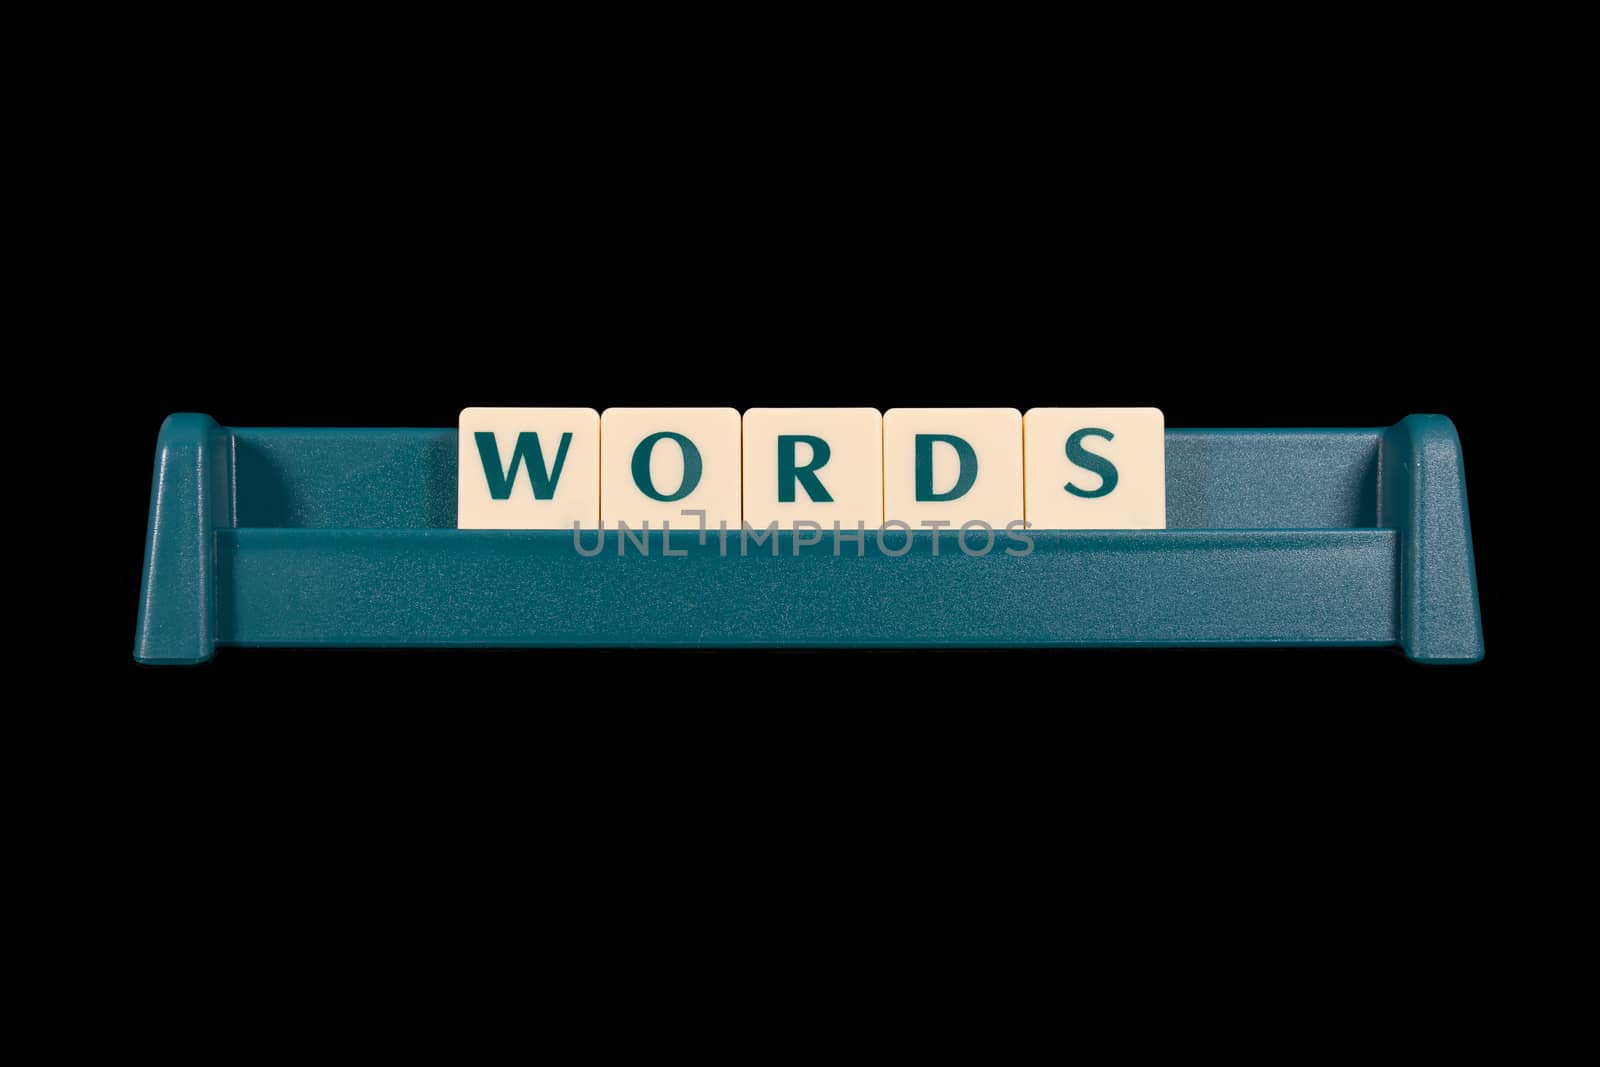 Word "WORDS" made from game piece letters